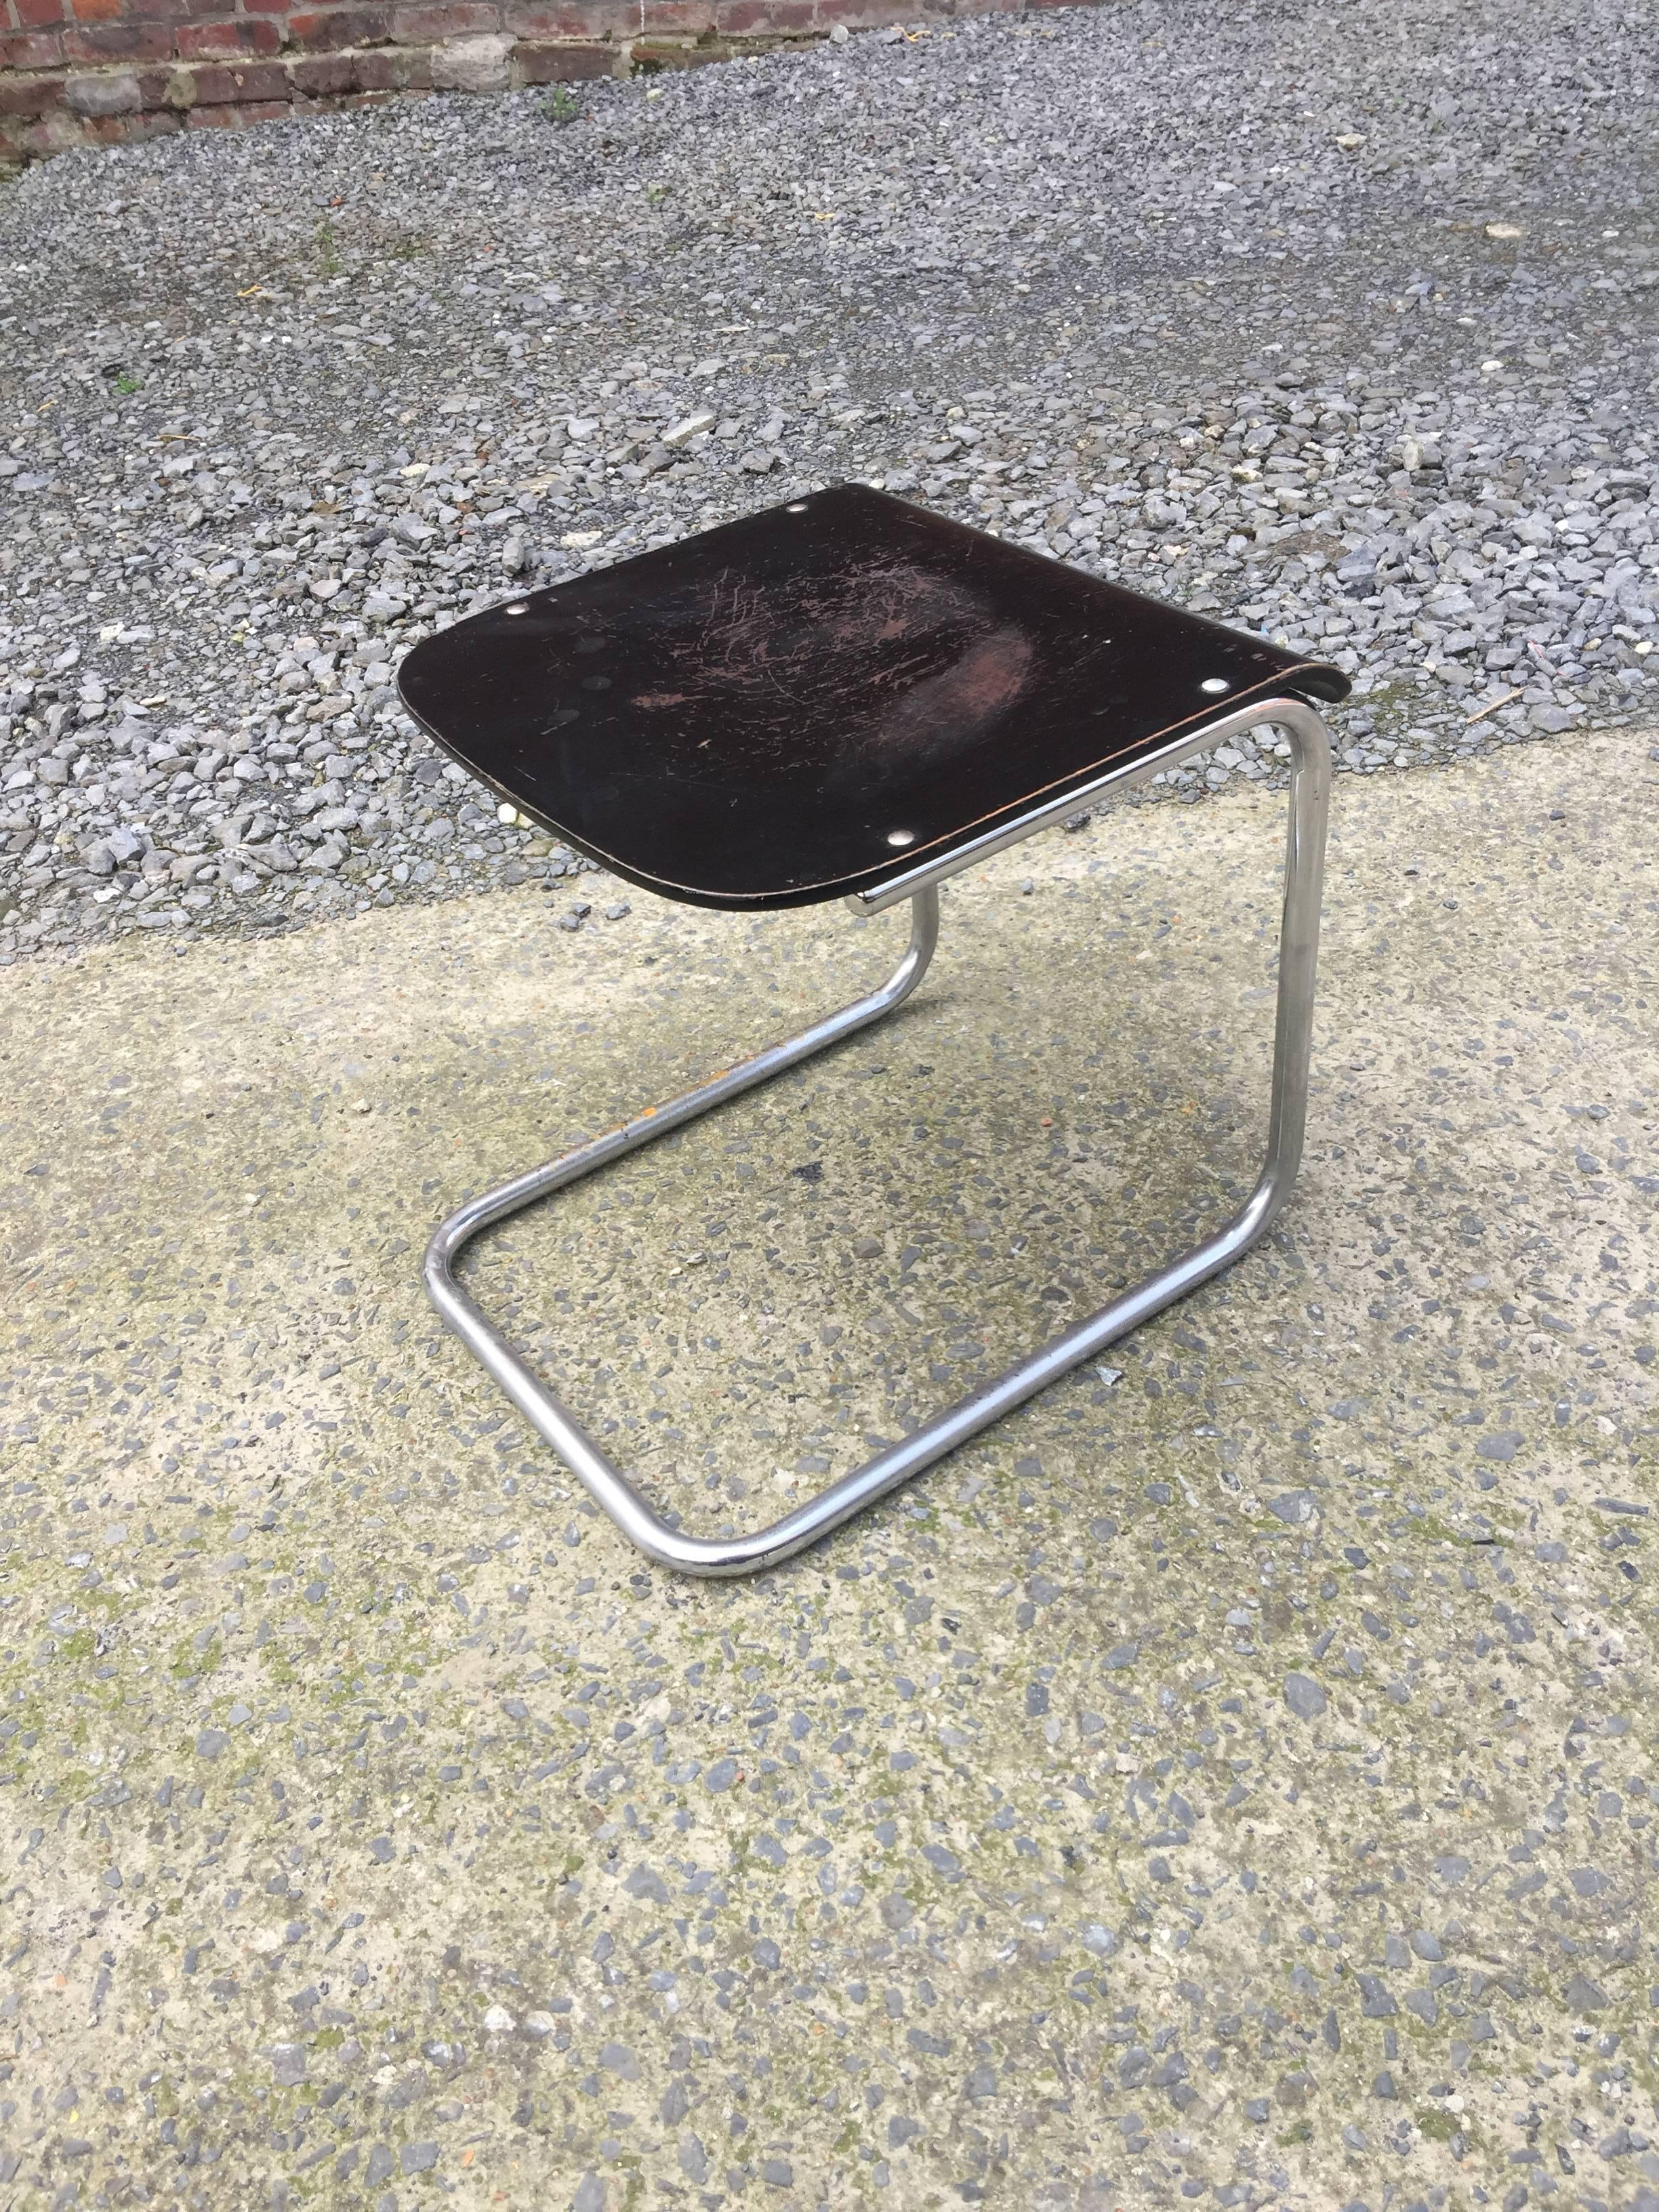 Mart Stam (1899-1986), tabouret H22, chrome metal base, lacquered wood seat.
Edition Maüser
Good condition, a few lacks of chrome.